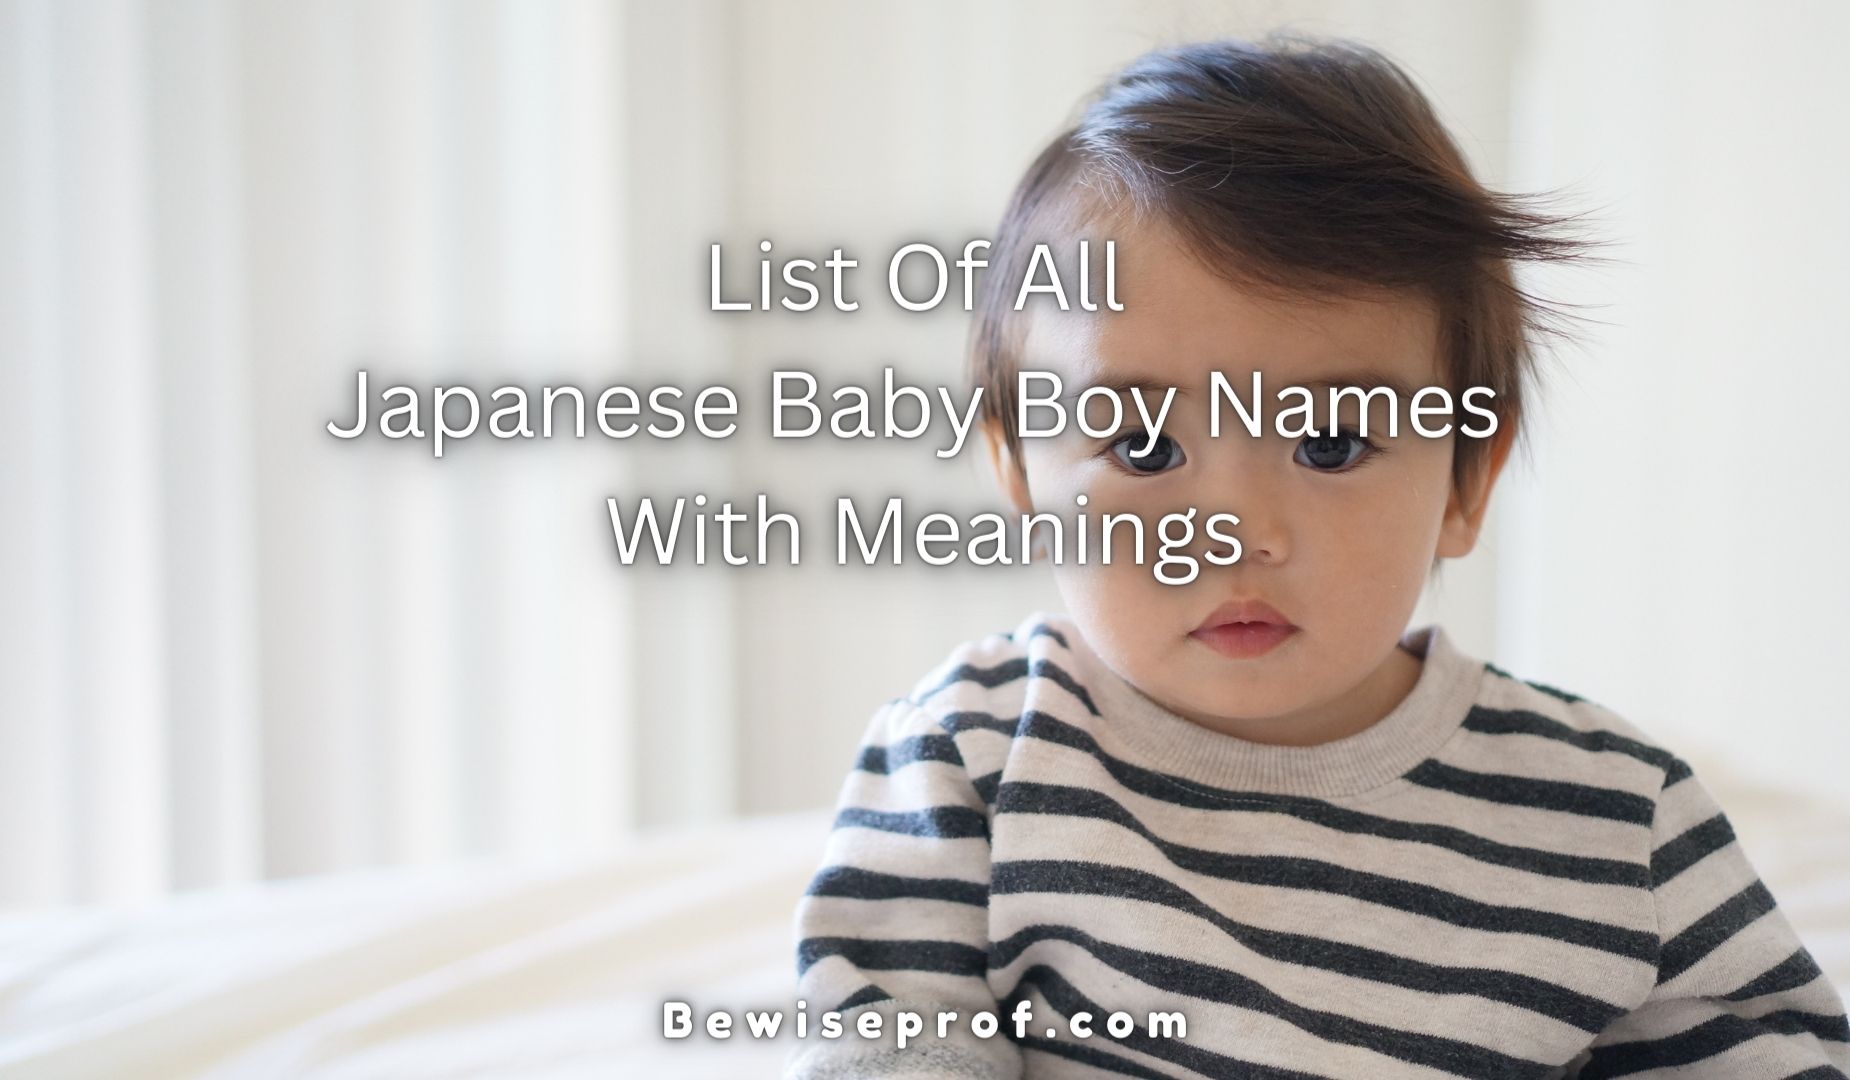 List Of All Japanese Baby Boy Names With Meanings